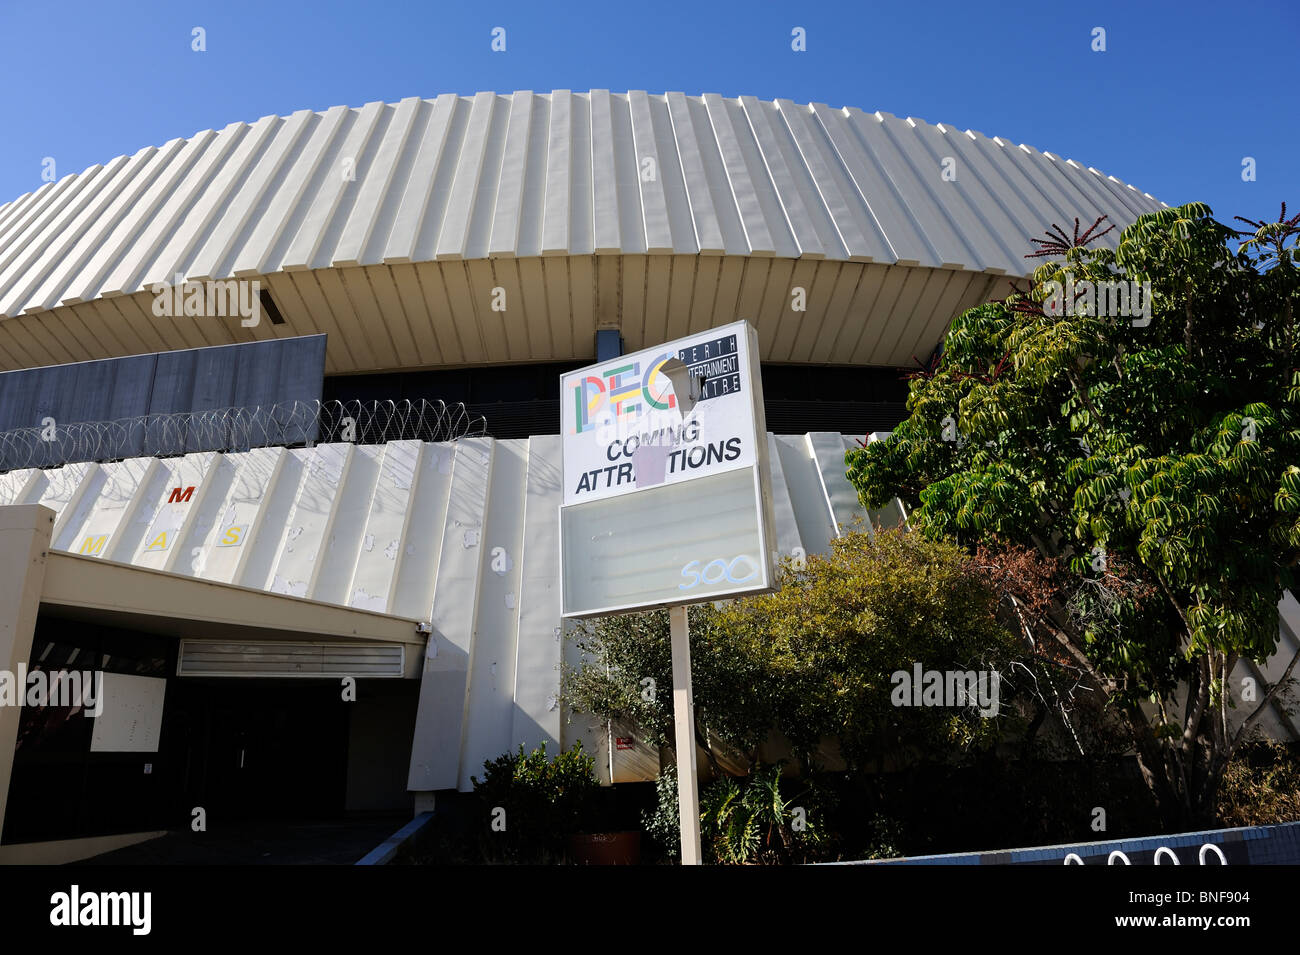 Vandalised sign outside the now demolished Perth Entertainment Centre. Perth, Western Australia Stock Photo